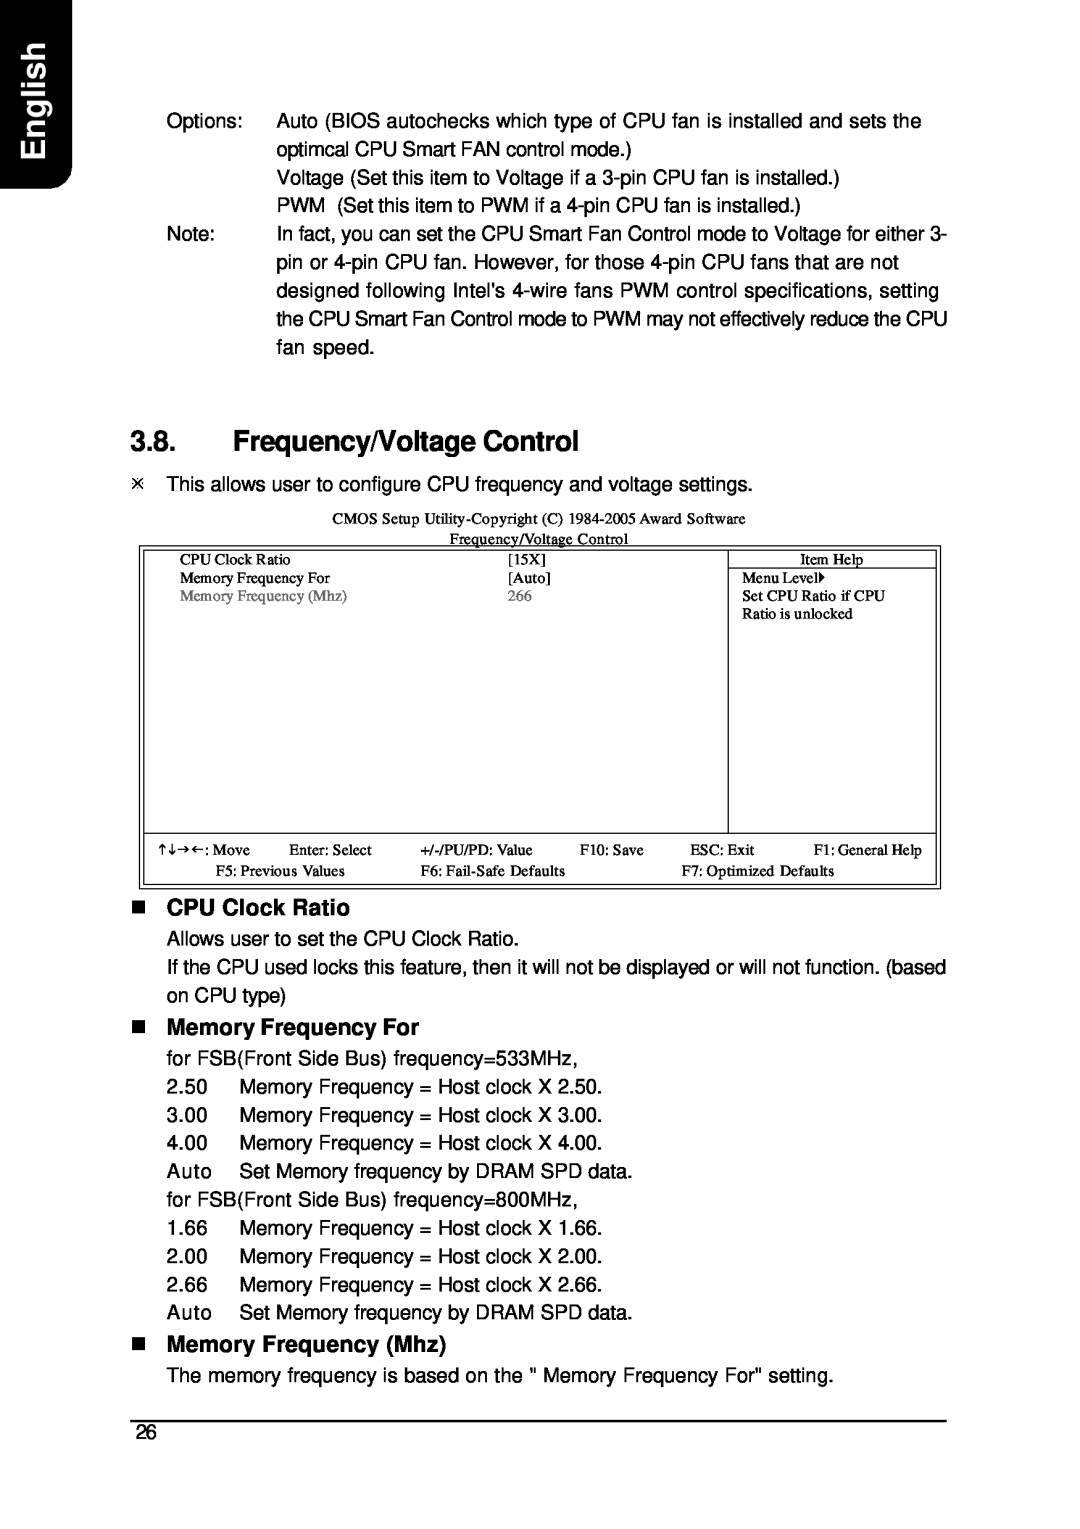 Intel XP-P5CM-GV Frequency/Voltage Control, nCPU Clock Ratio, nMemory Frequency For, nMemory Frequency Mhz, English 